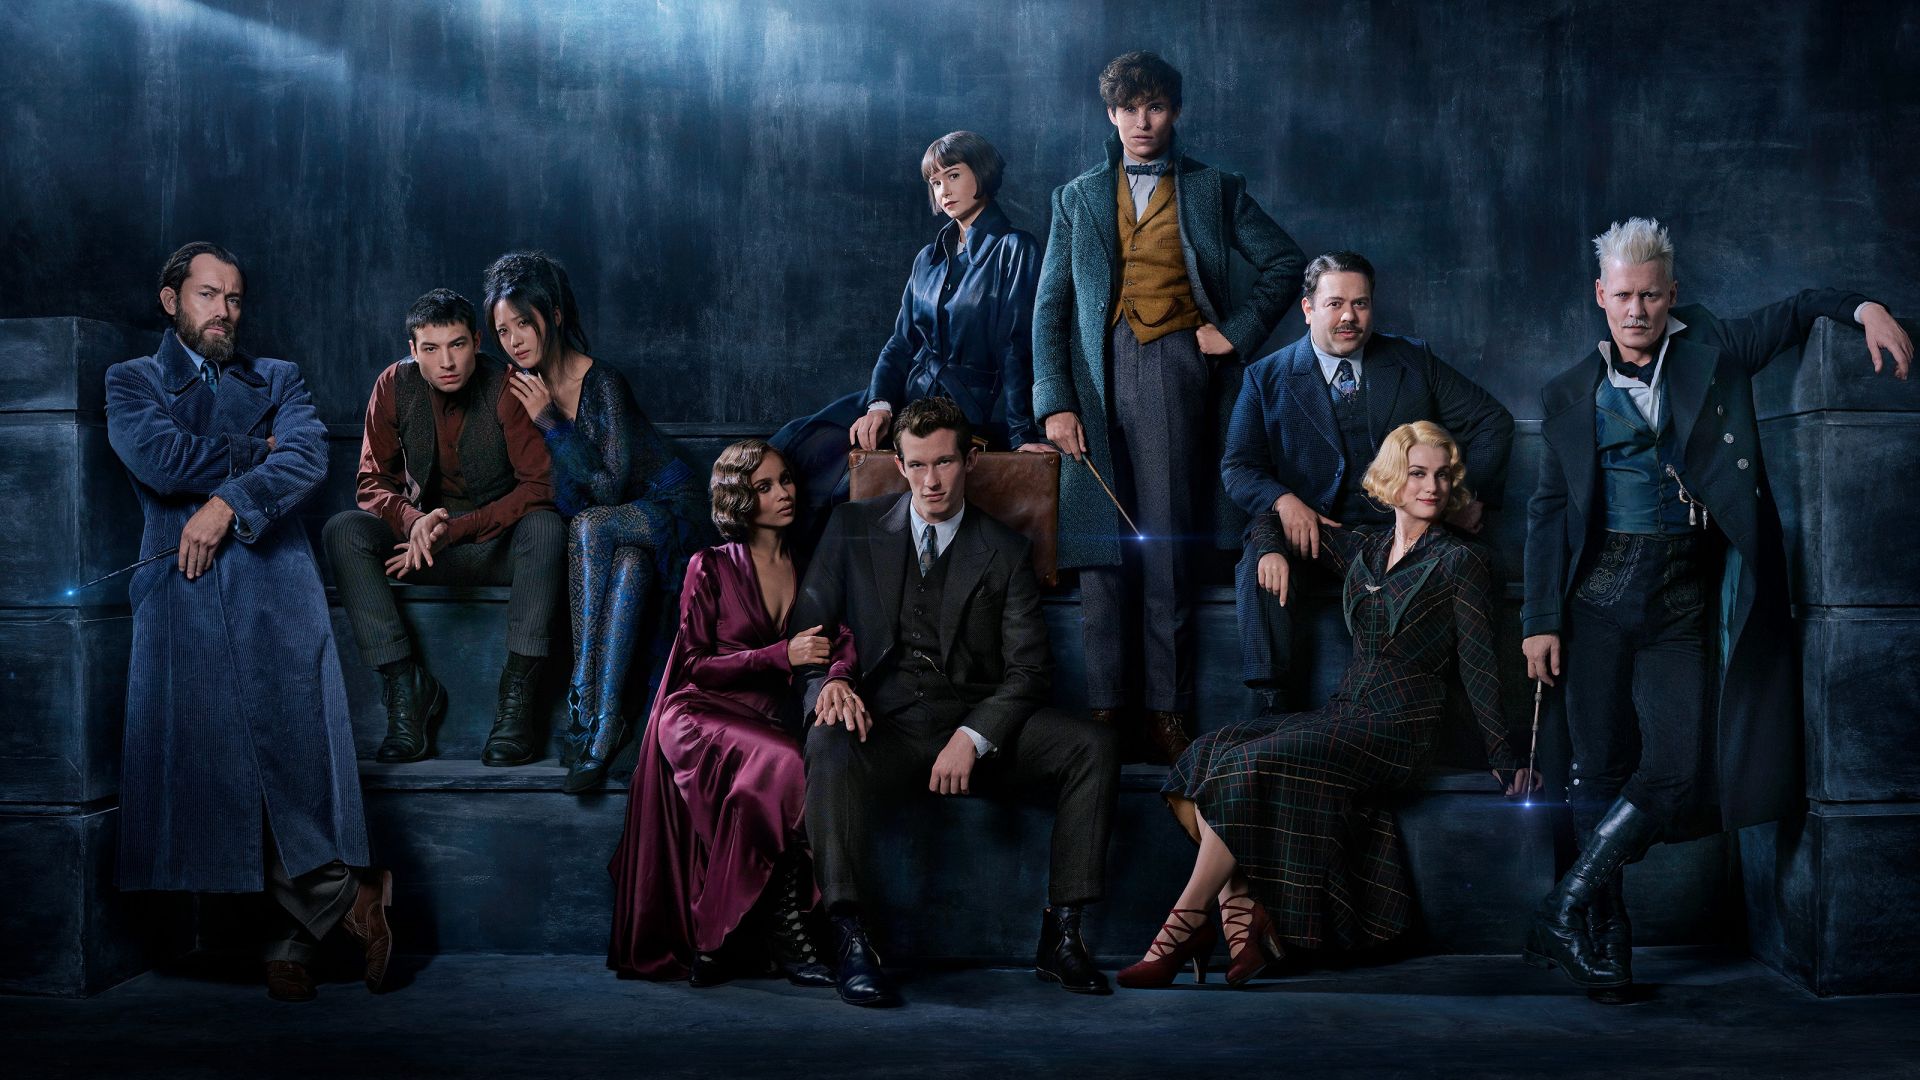 Wallpaper Fantastic Beasts: The Crimes of Grindelwald, movie, cast